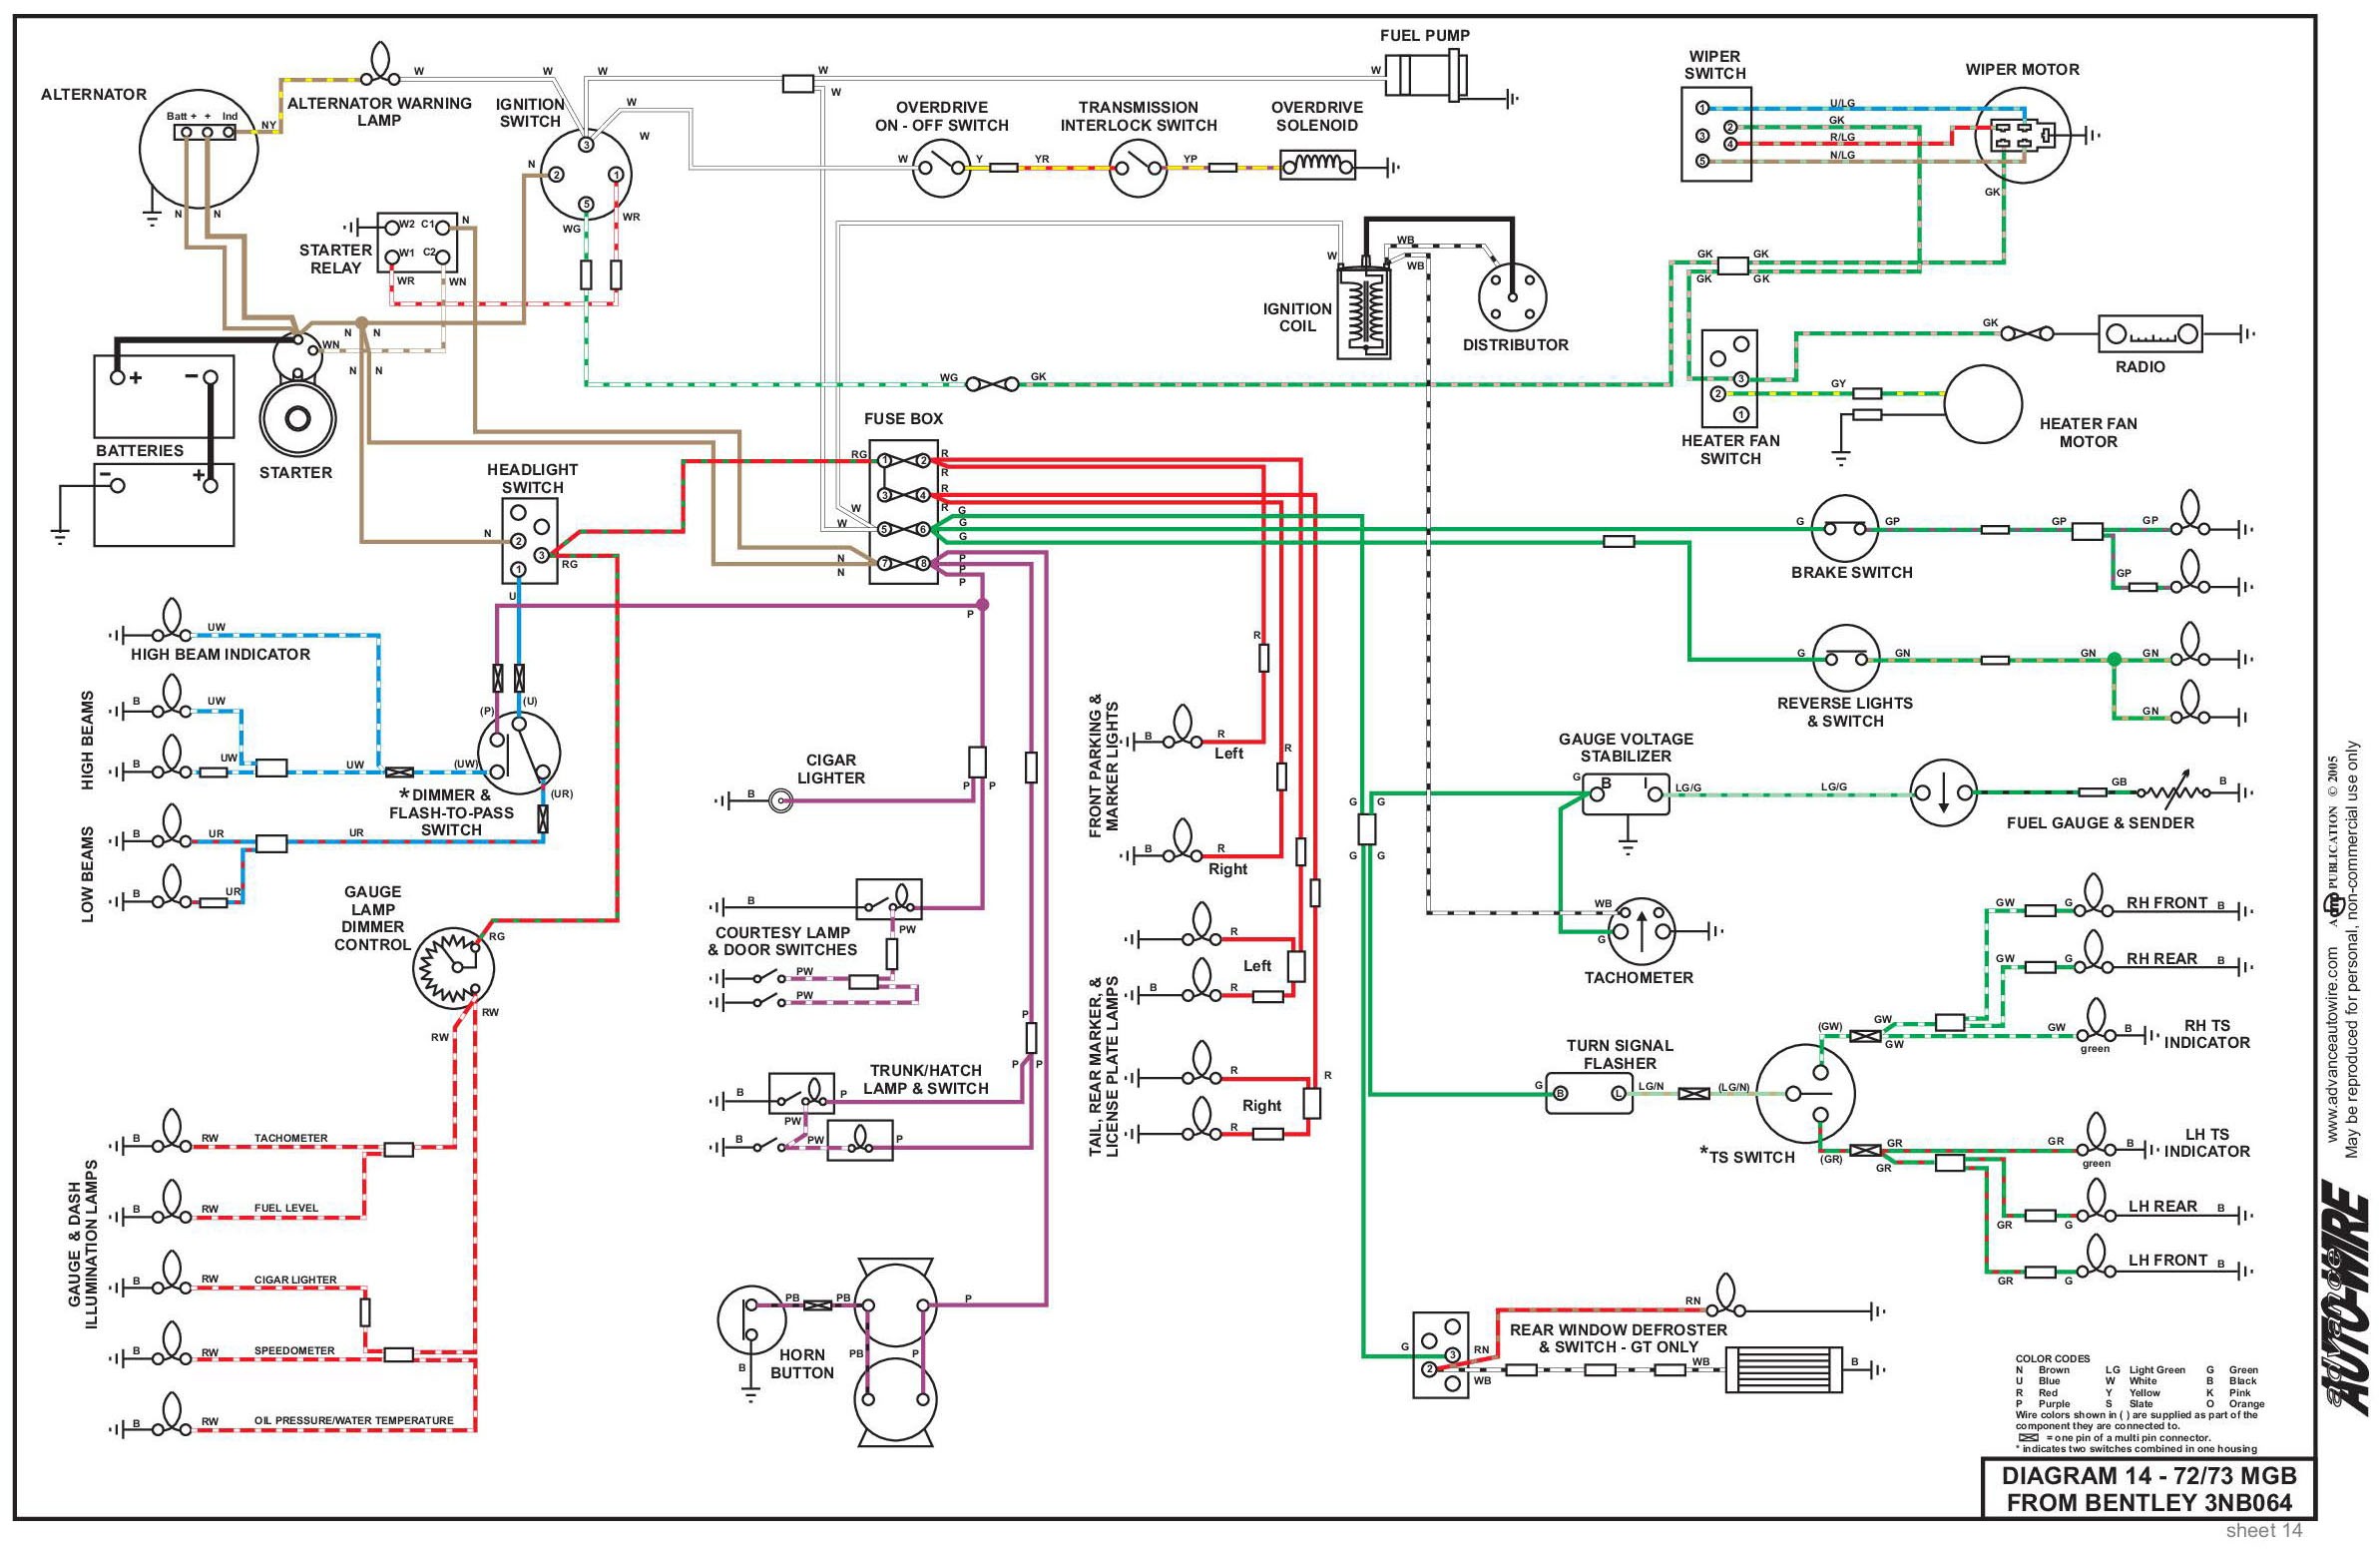 Wiring Diagram for 3 Prong Flasher Electrical System Of Wiring Diagram for 3 Prong Flasher